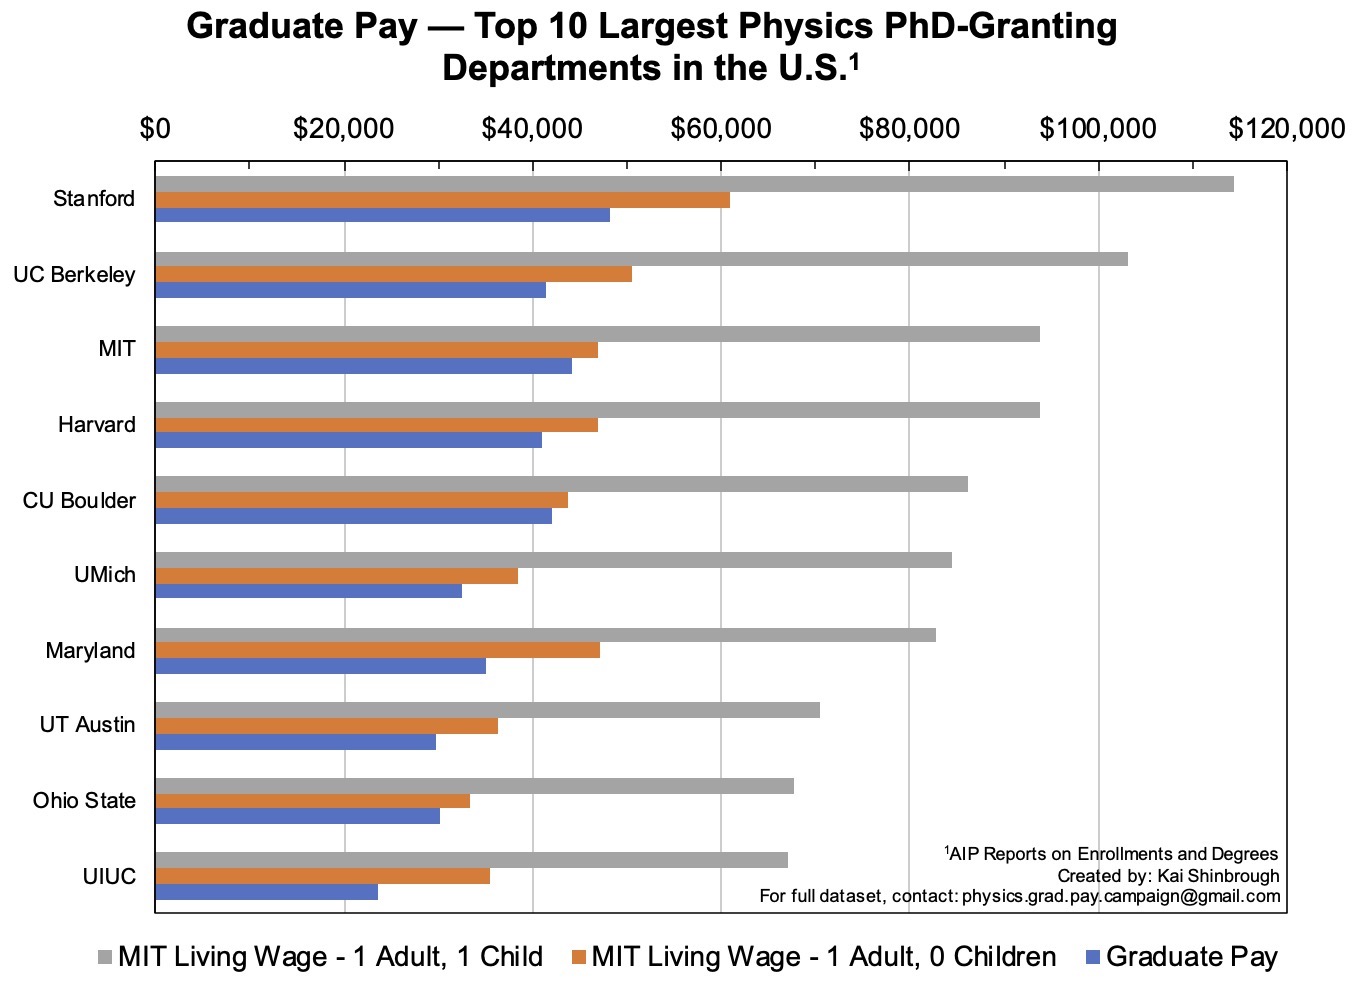 Bar graph of Physics graduate pay, the MIT living wage for 1 adult and 0 children, and the MIT living wage for 1 adult and 1 child, for the top 10 largest Physics PhD departments in the U.S.